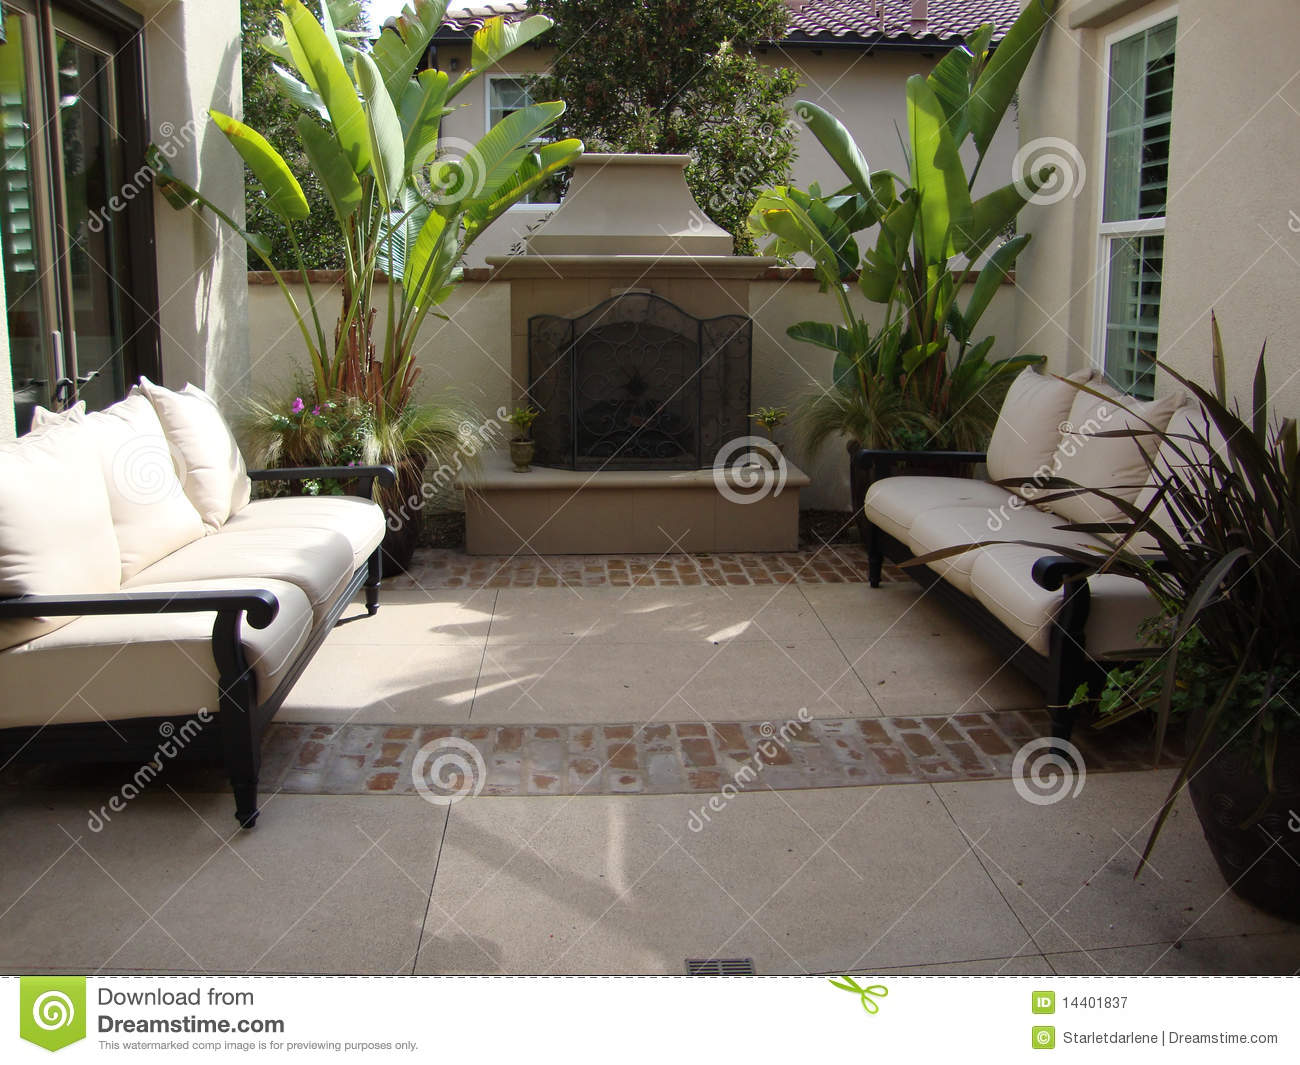 Outdoor Patio And Fireplace Royalty Free Stock Photography   Image